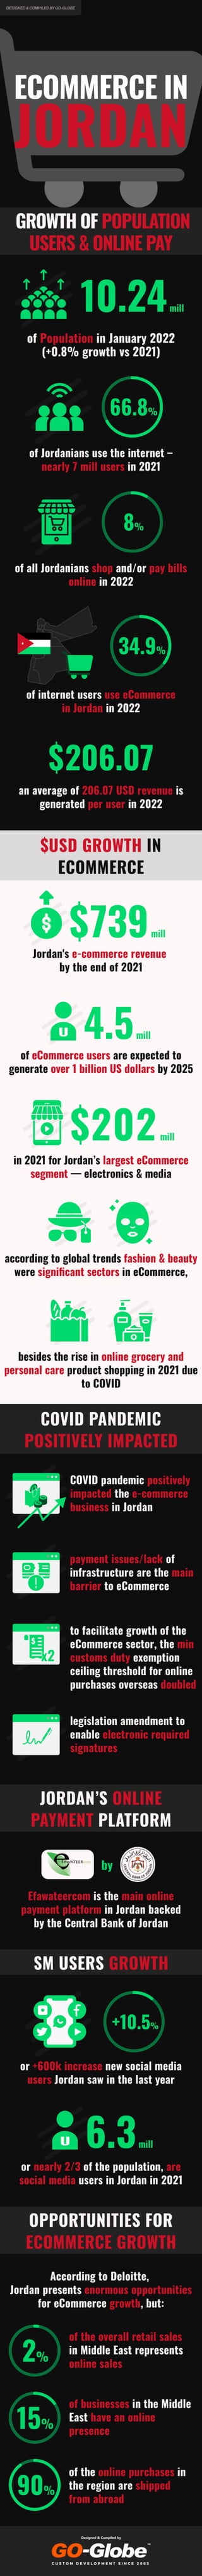 Rise of NFT: Facts & Trends [Infographic]